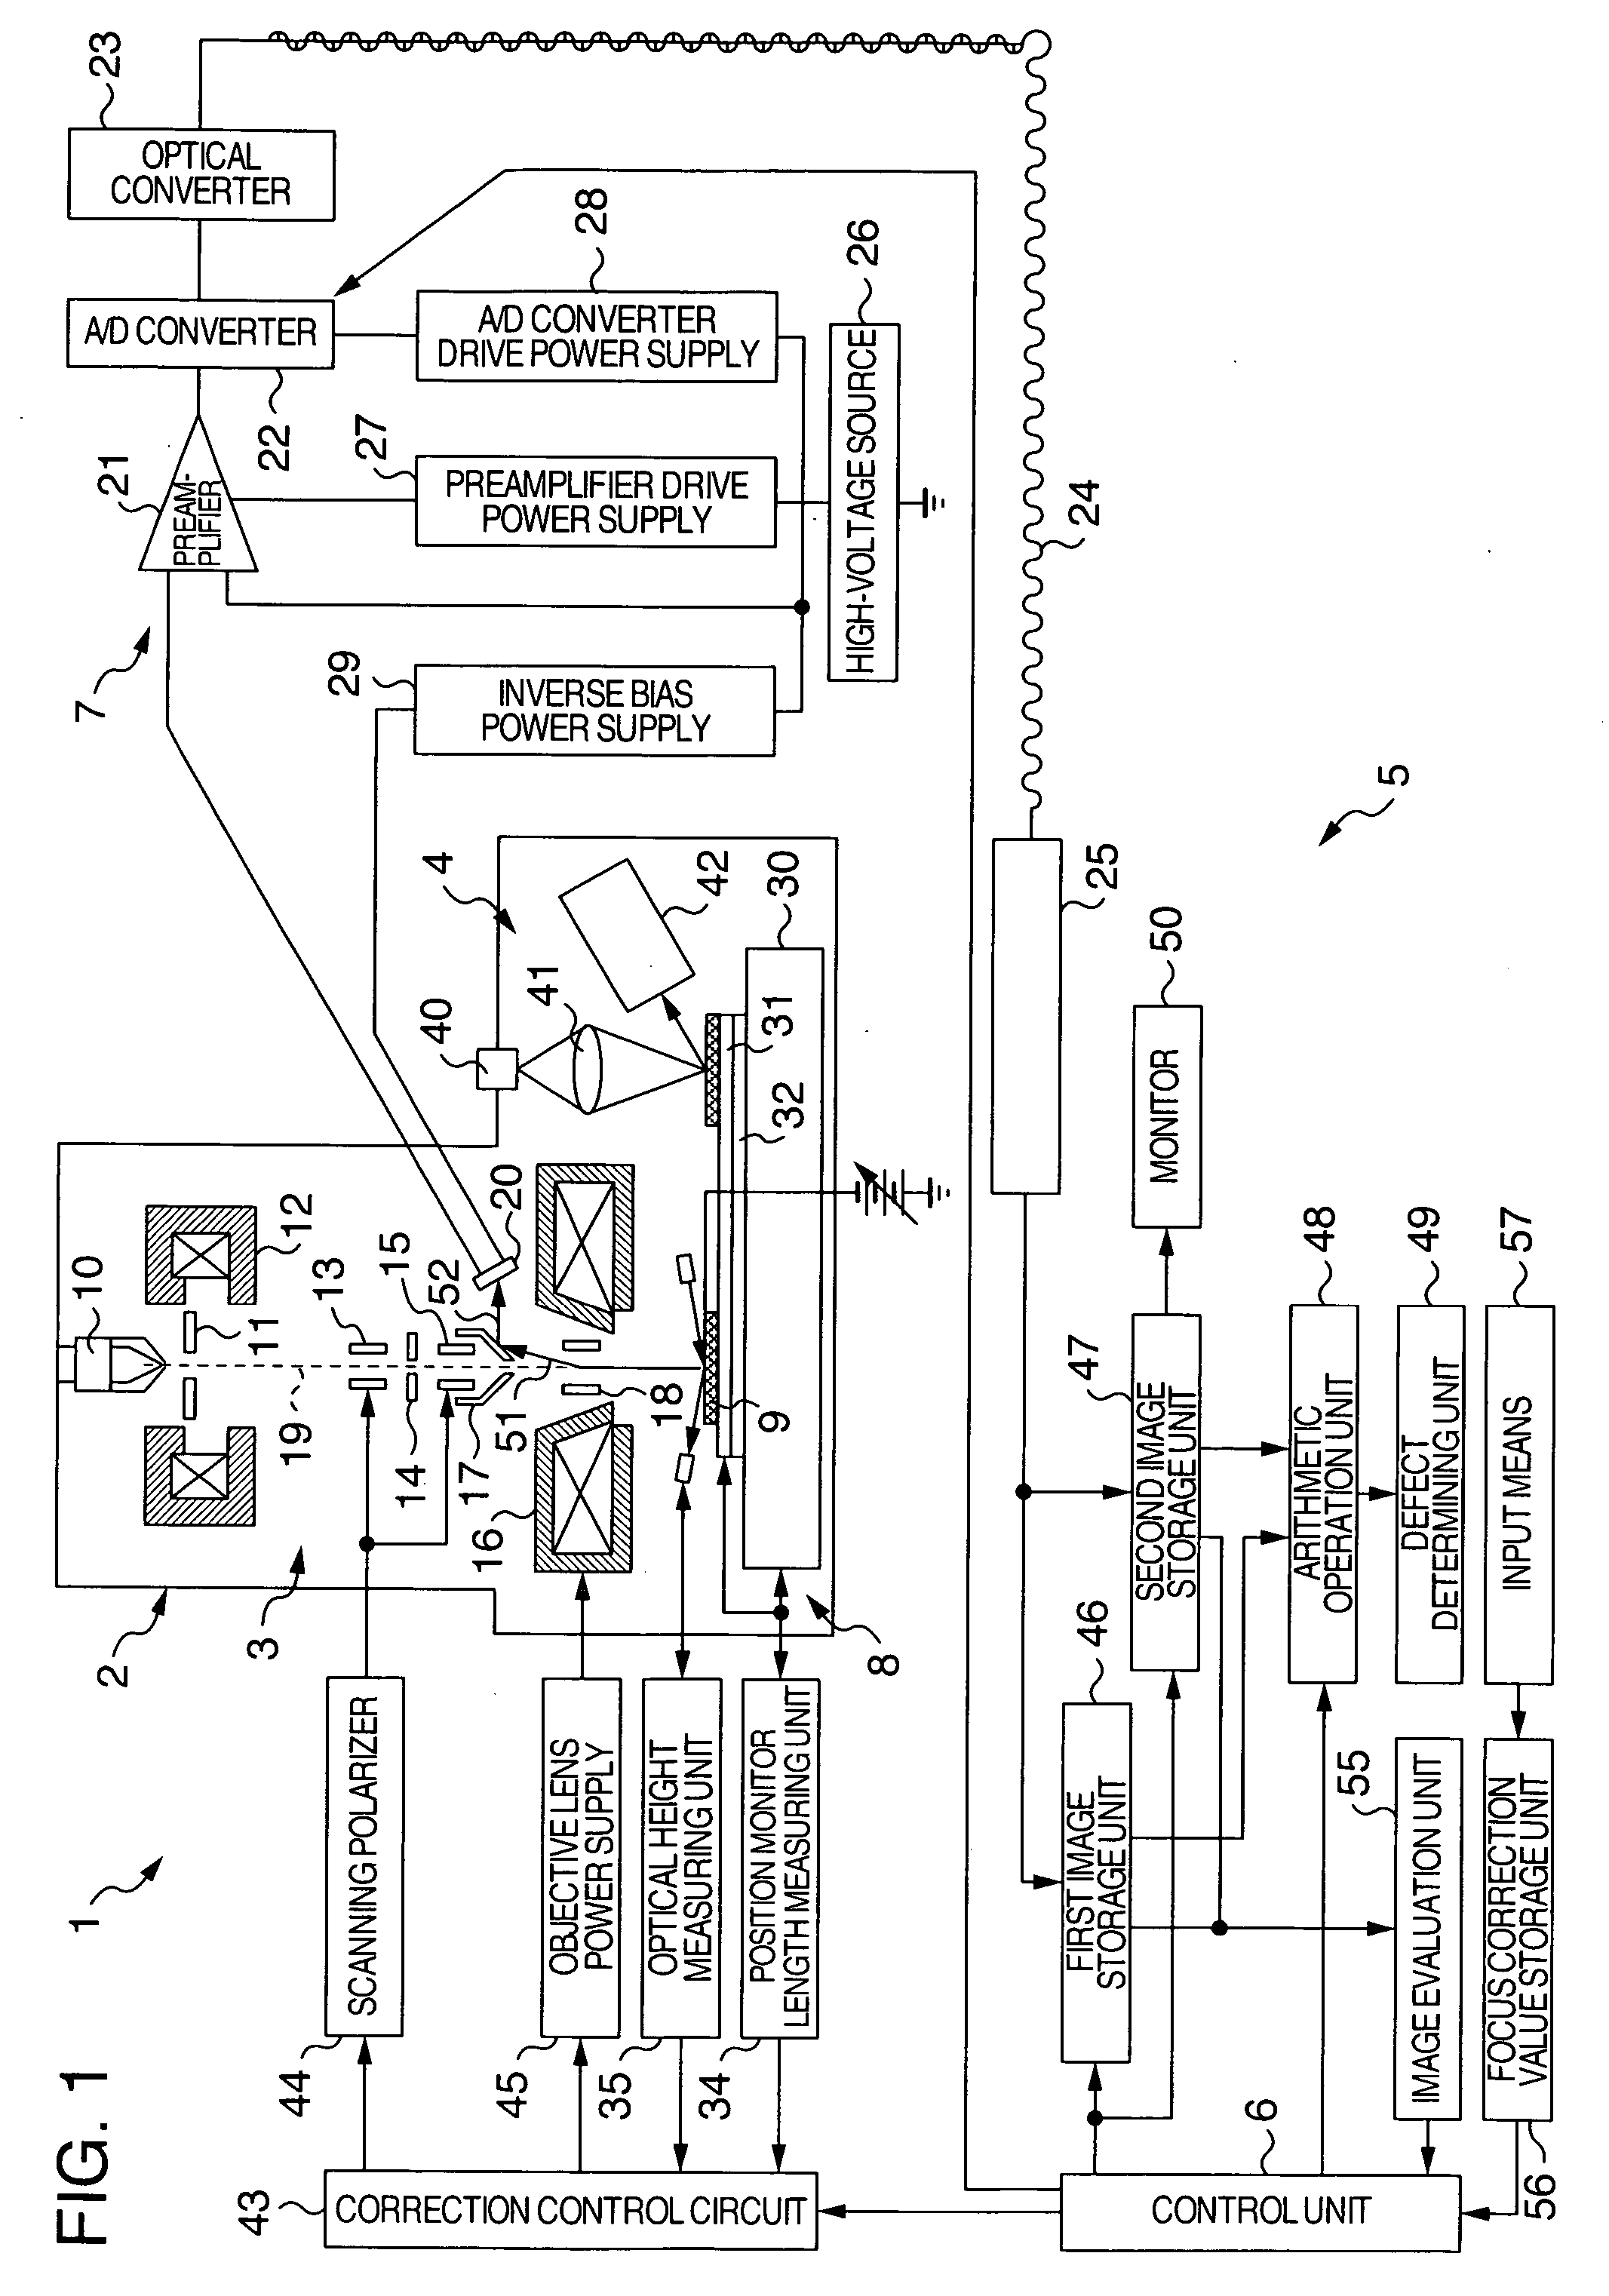 Focus correction method for inspection of circuit patterns